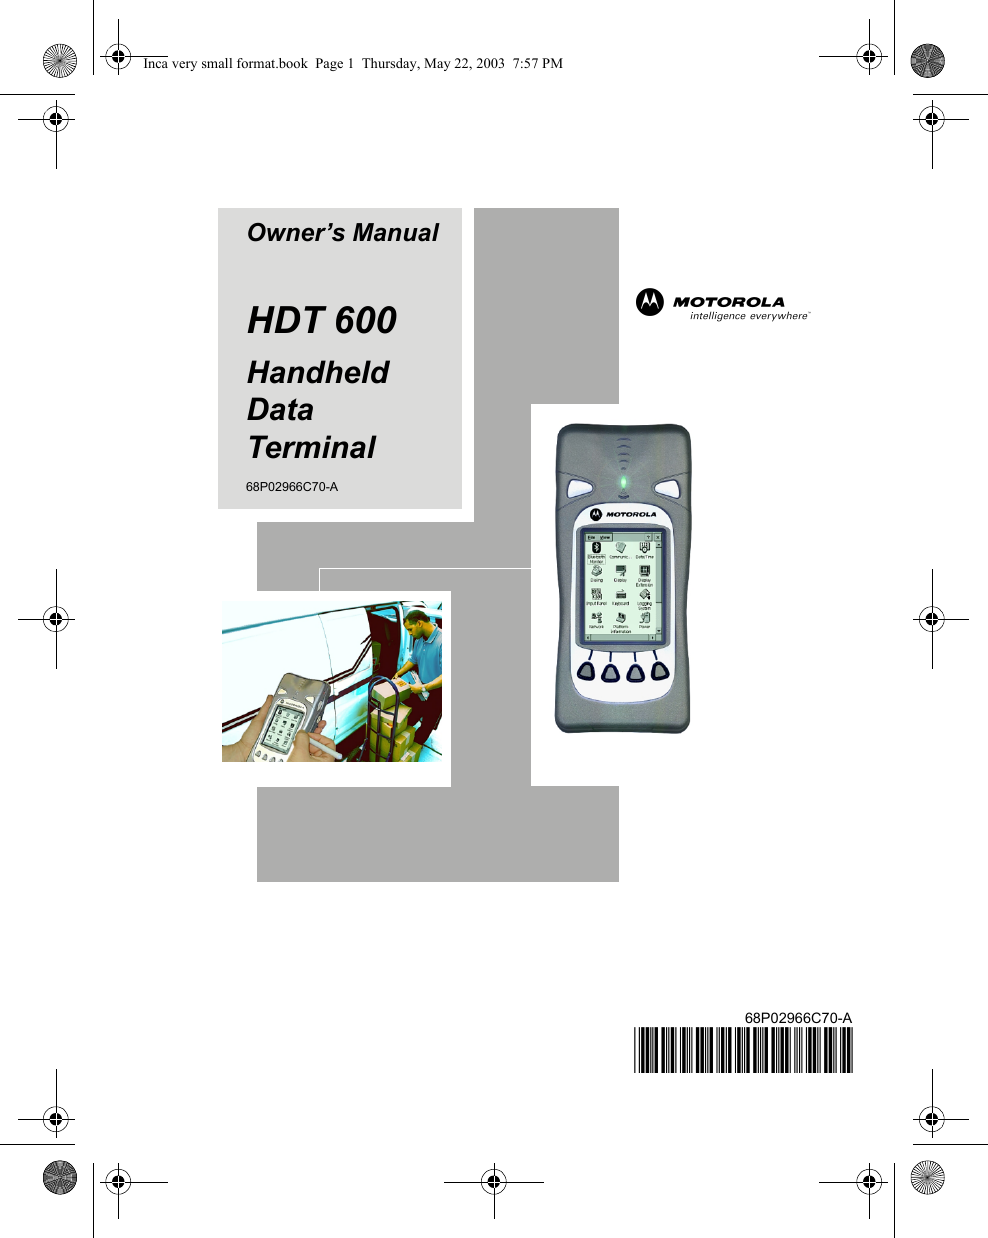 Owner’s ManualHDT 600Handheld Data Terminal68P02966C70-A68P02966C70-A@6802966C70@aInca very small format.book  Page 1  Thursday, May 22, 2003  7:57 PM